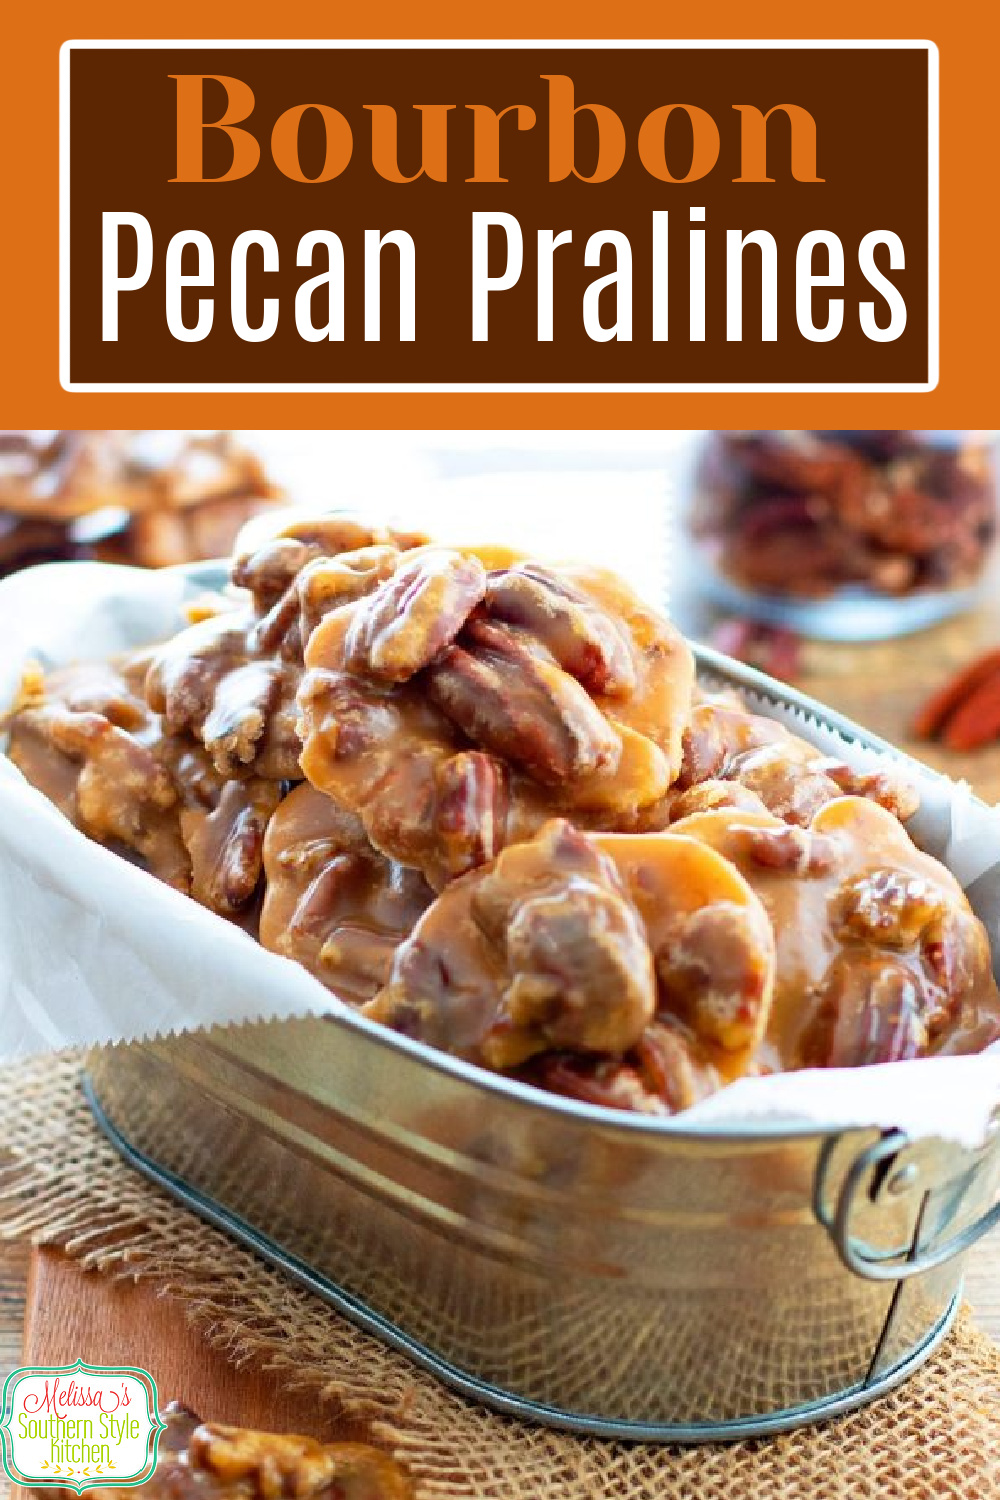 These Bourbon Pecan Pralines are indulgent, and certain to earn a spot on your short list of special occasion sweets #pecanpralines #southernpralinesrecipe #bourbonpecanpralines #pralines #candyrecipes #pecans #southernrecipes #christmascandy #mardisgras via @melissasssk